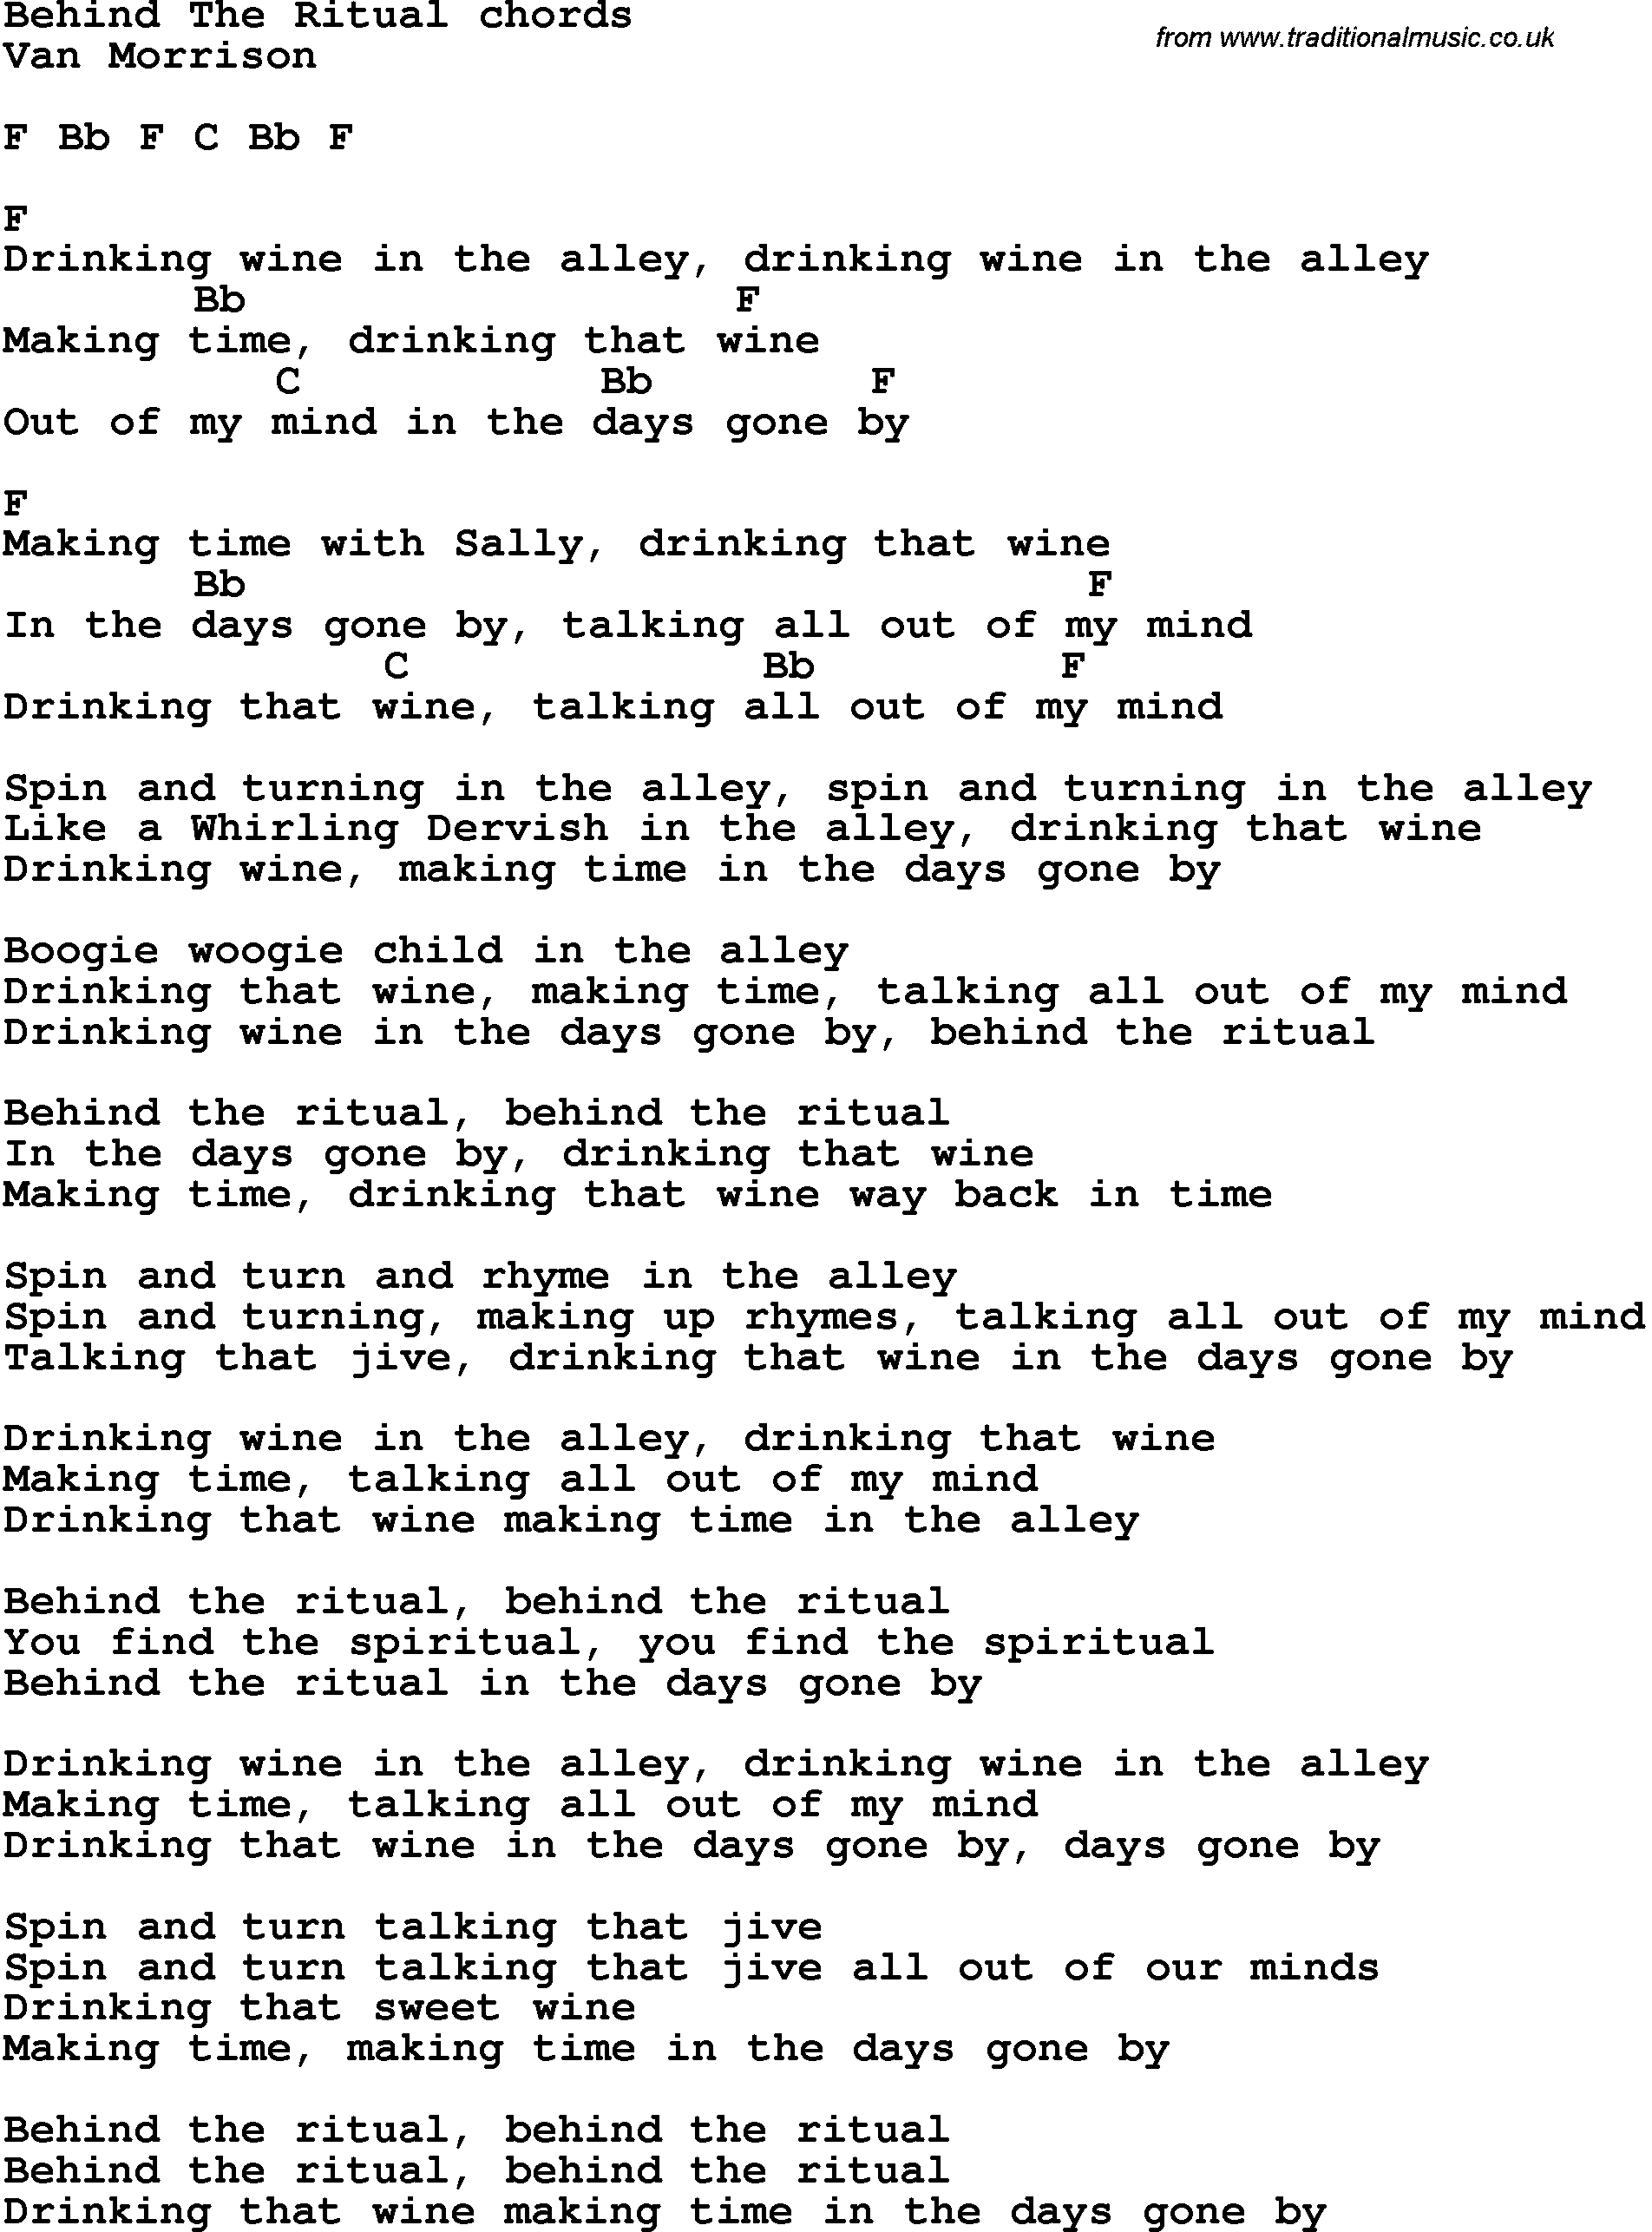 Song Lyrics with guitar chords for Behind The Ritual